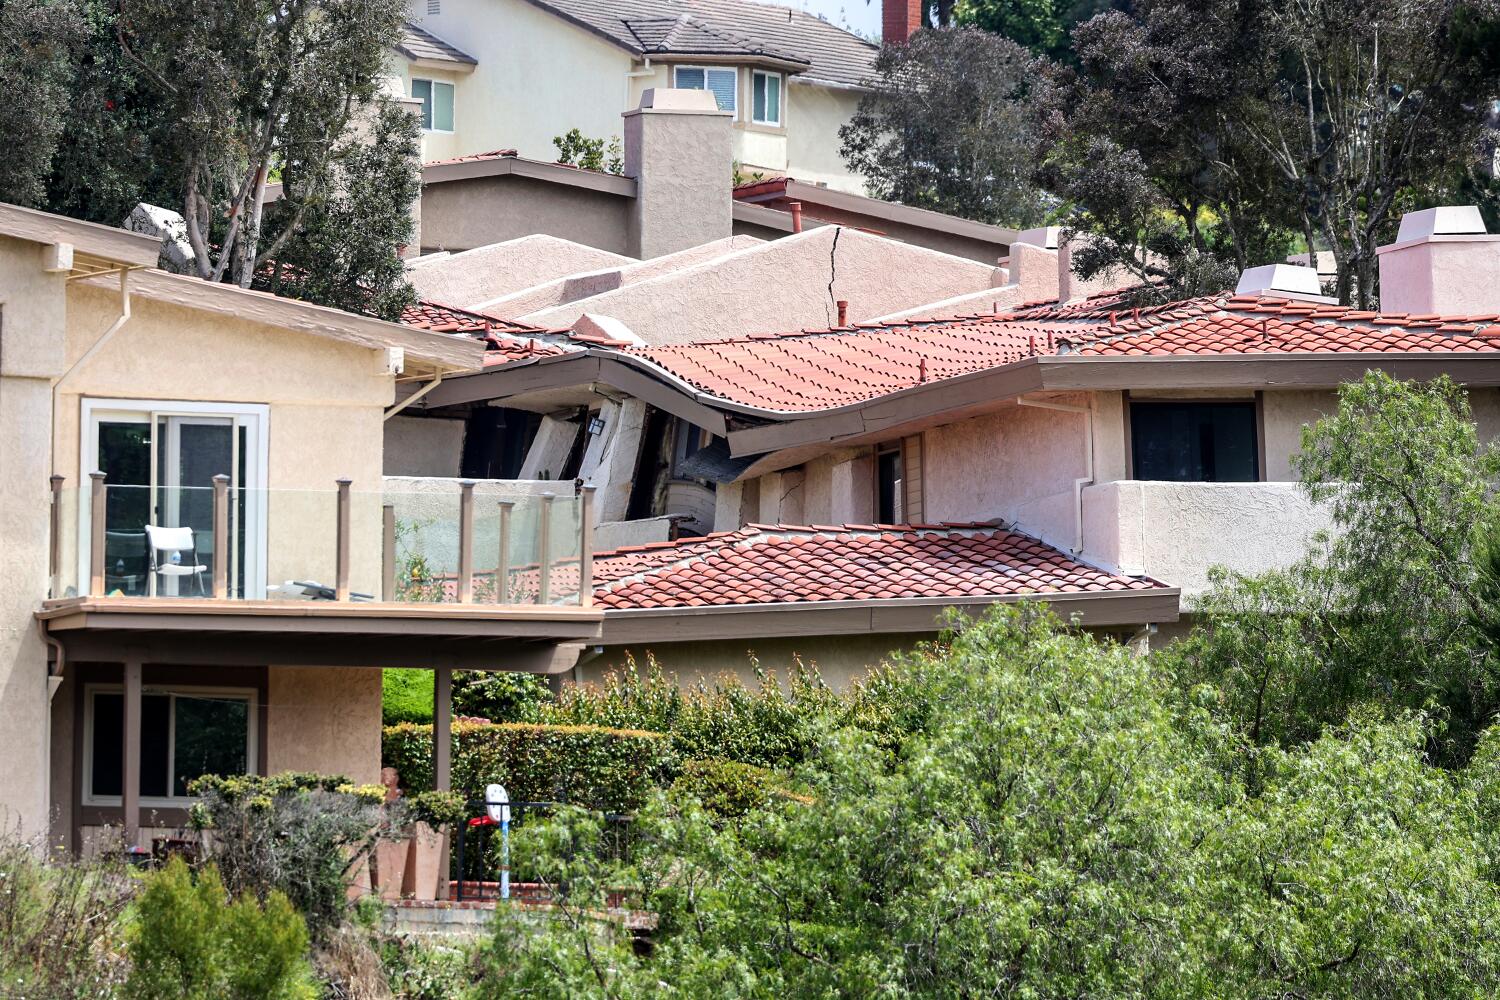 'Unusually heavy' rains caused Rolling Hills Estates landslide, city report finds